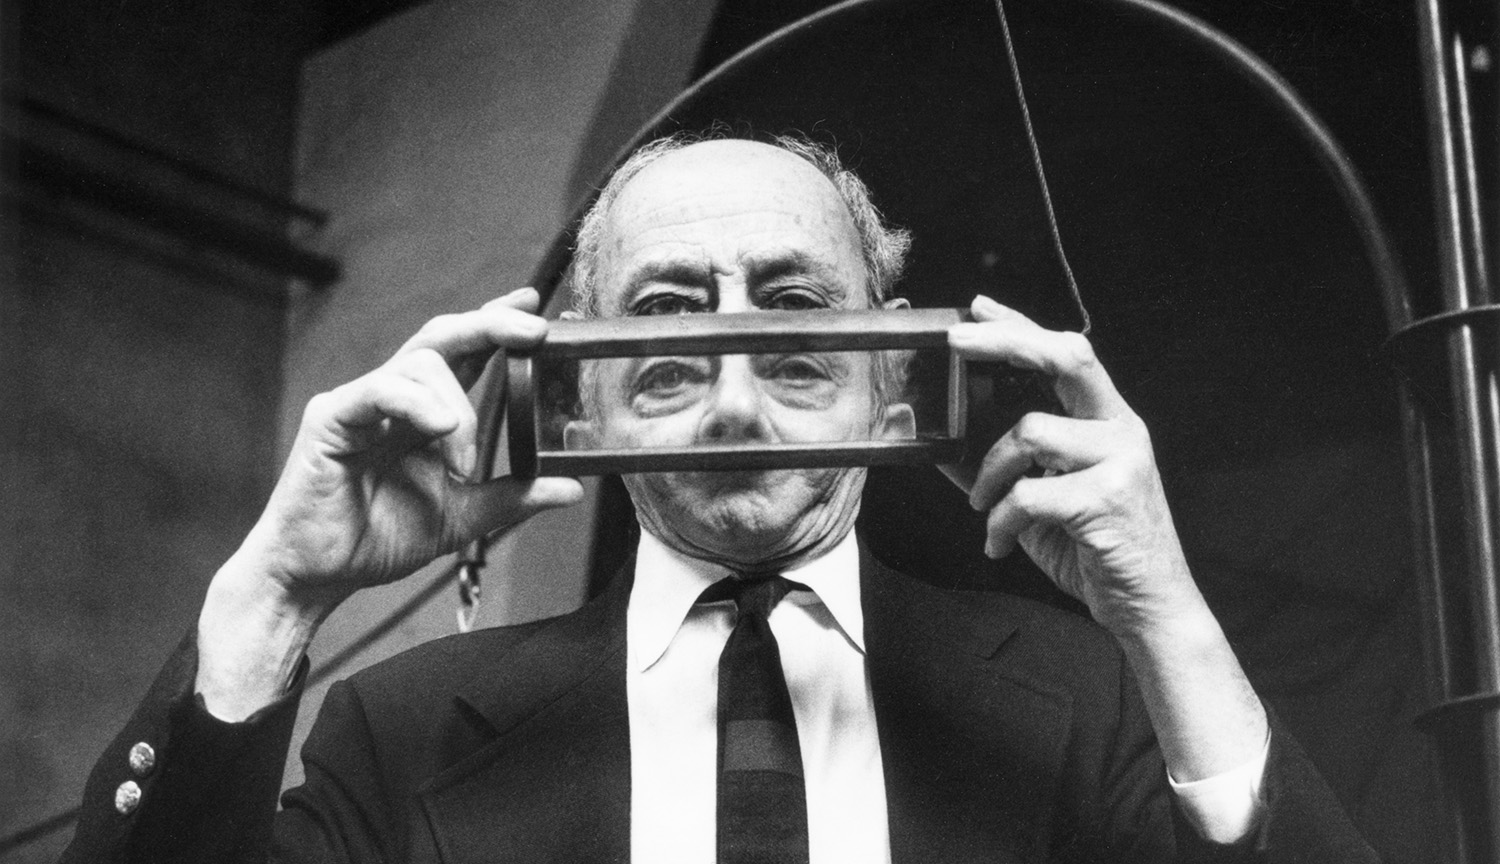 Photo of an older man holding a framed, transparent prism, which partly blocks and distorts his face.